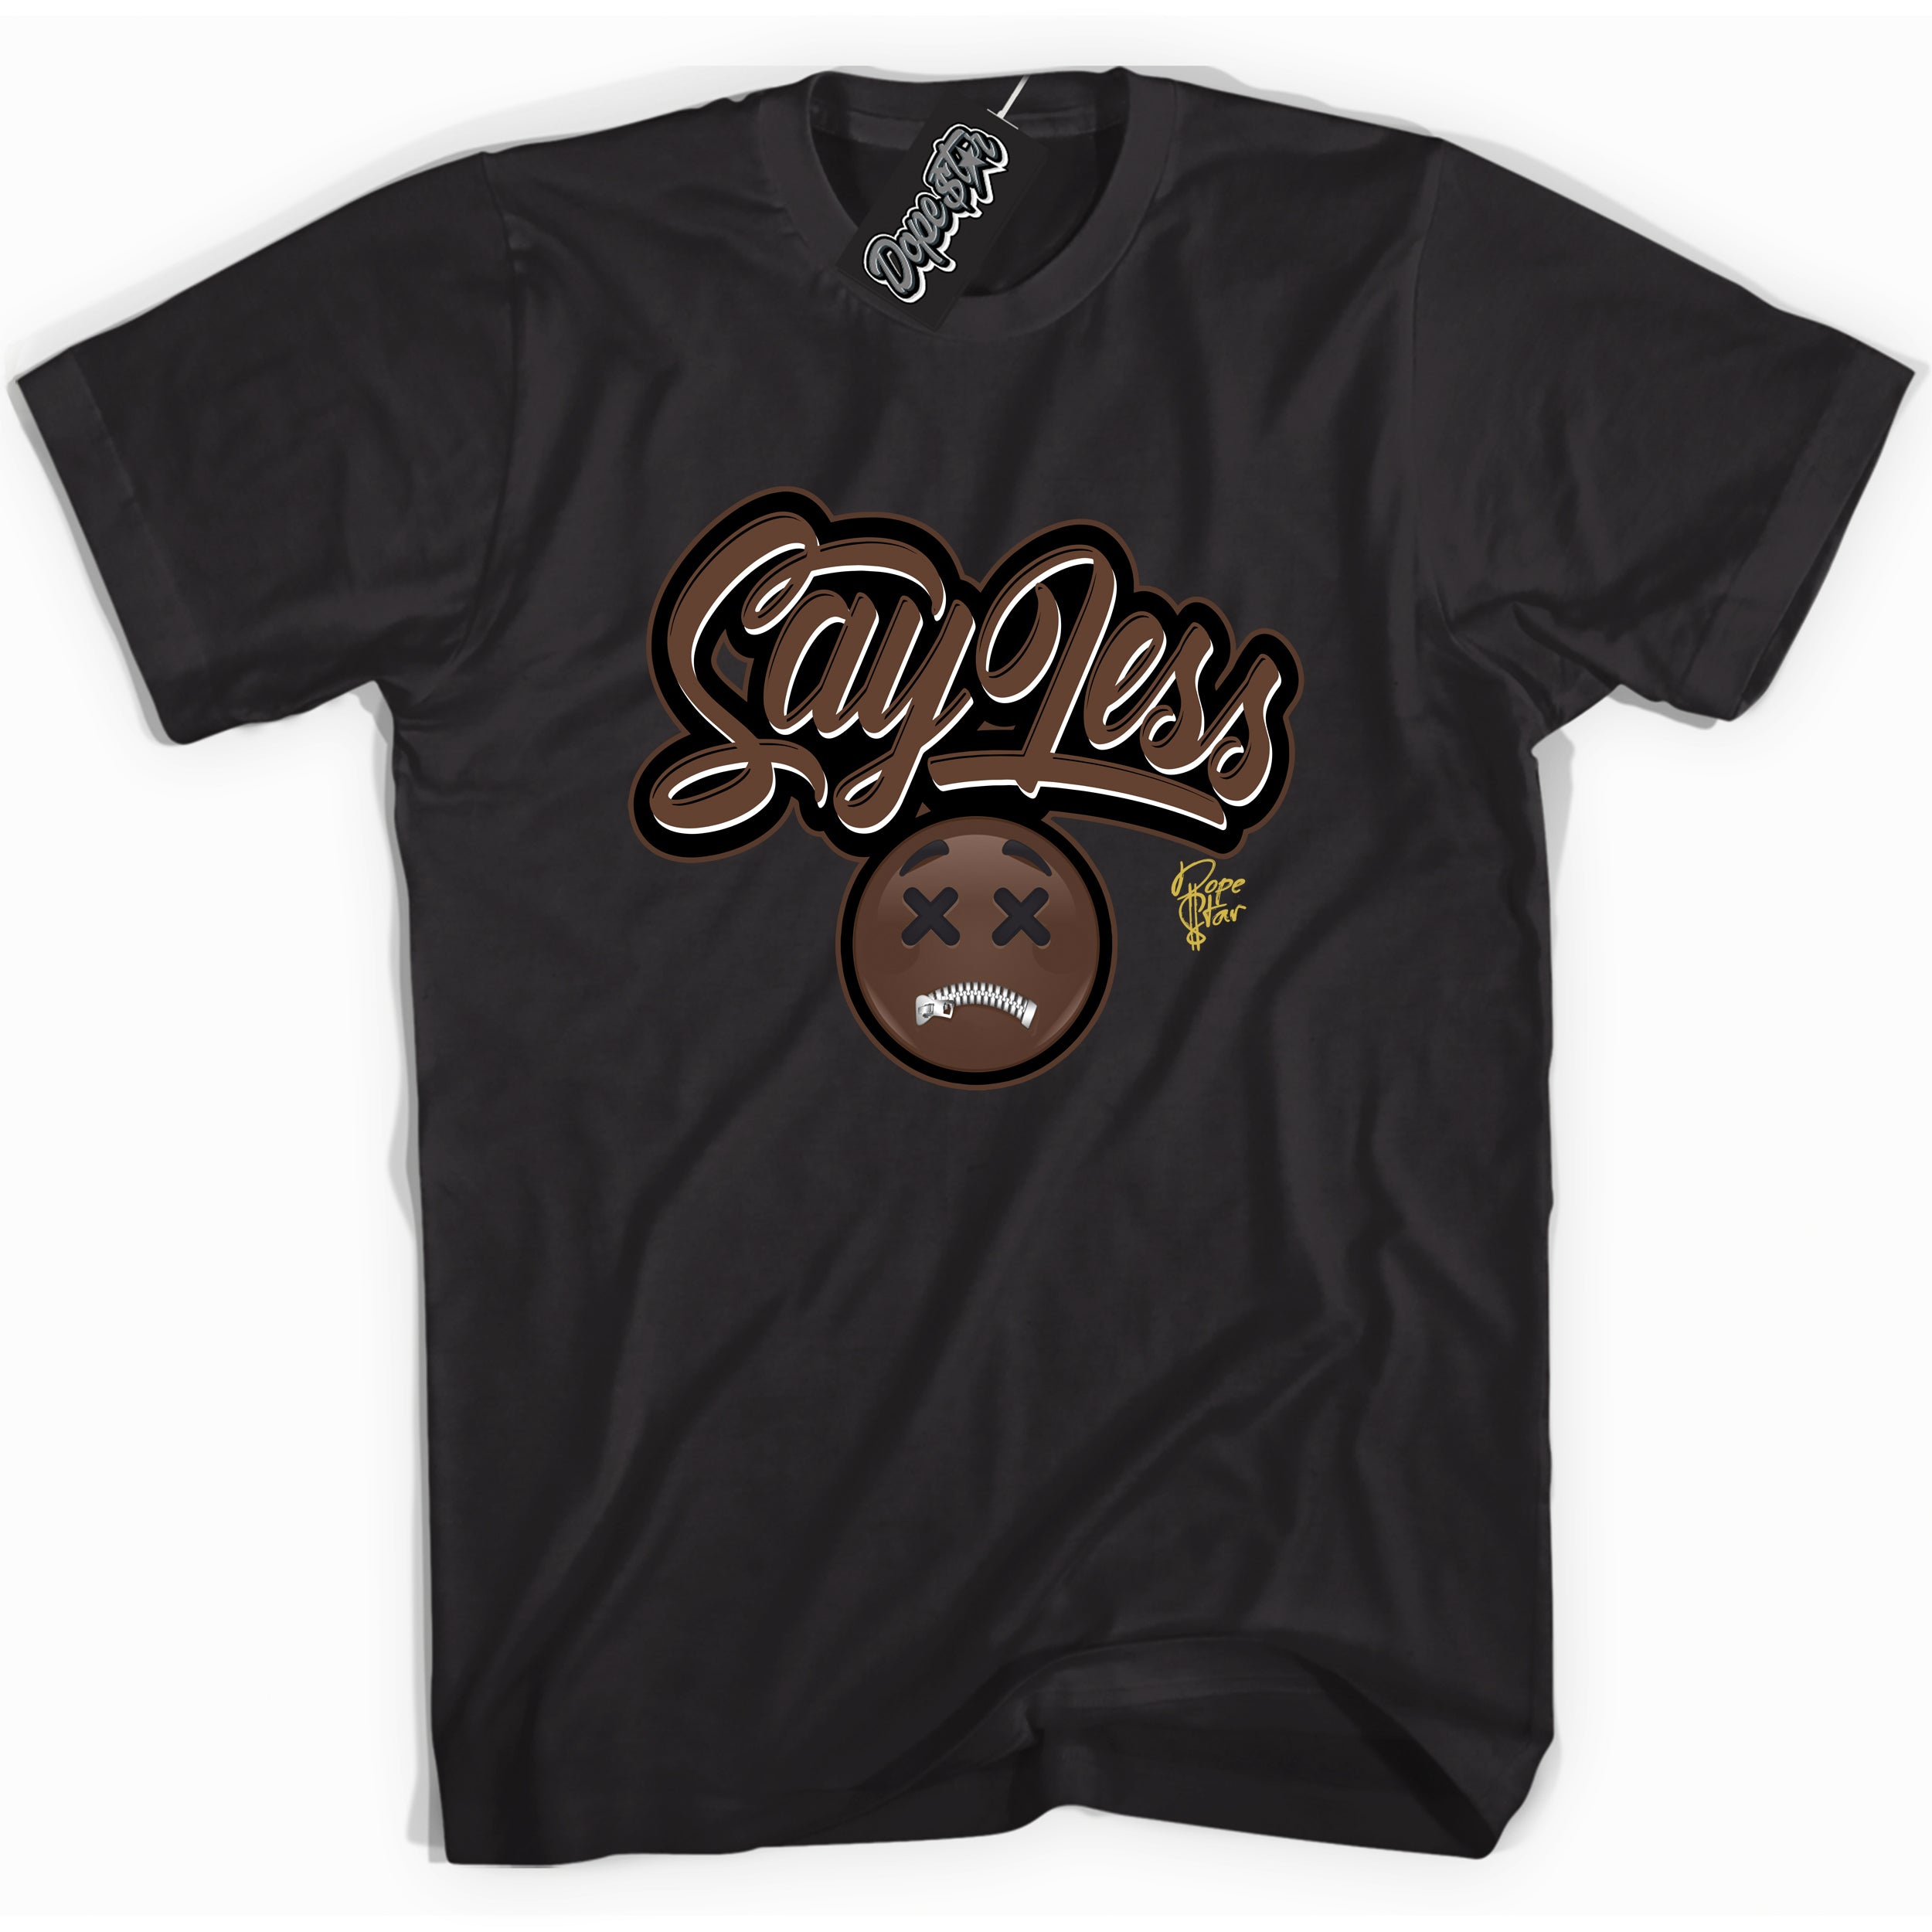 Cool Black graphic tee with “ Say Less ” design, that perfectly matches Palomino 1s sneakers 